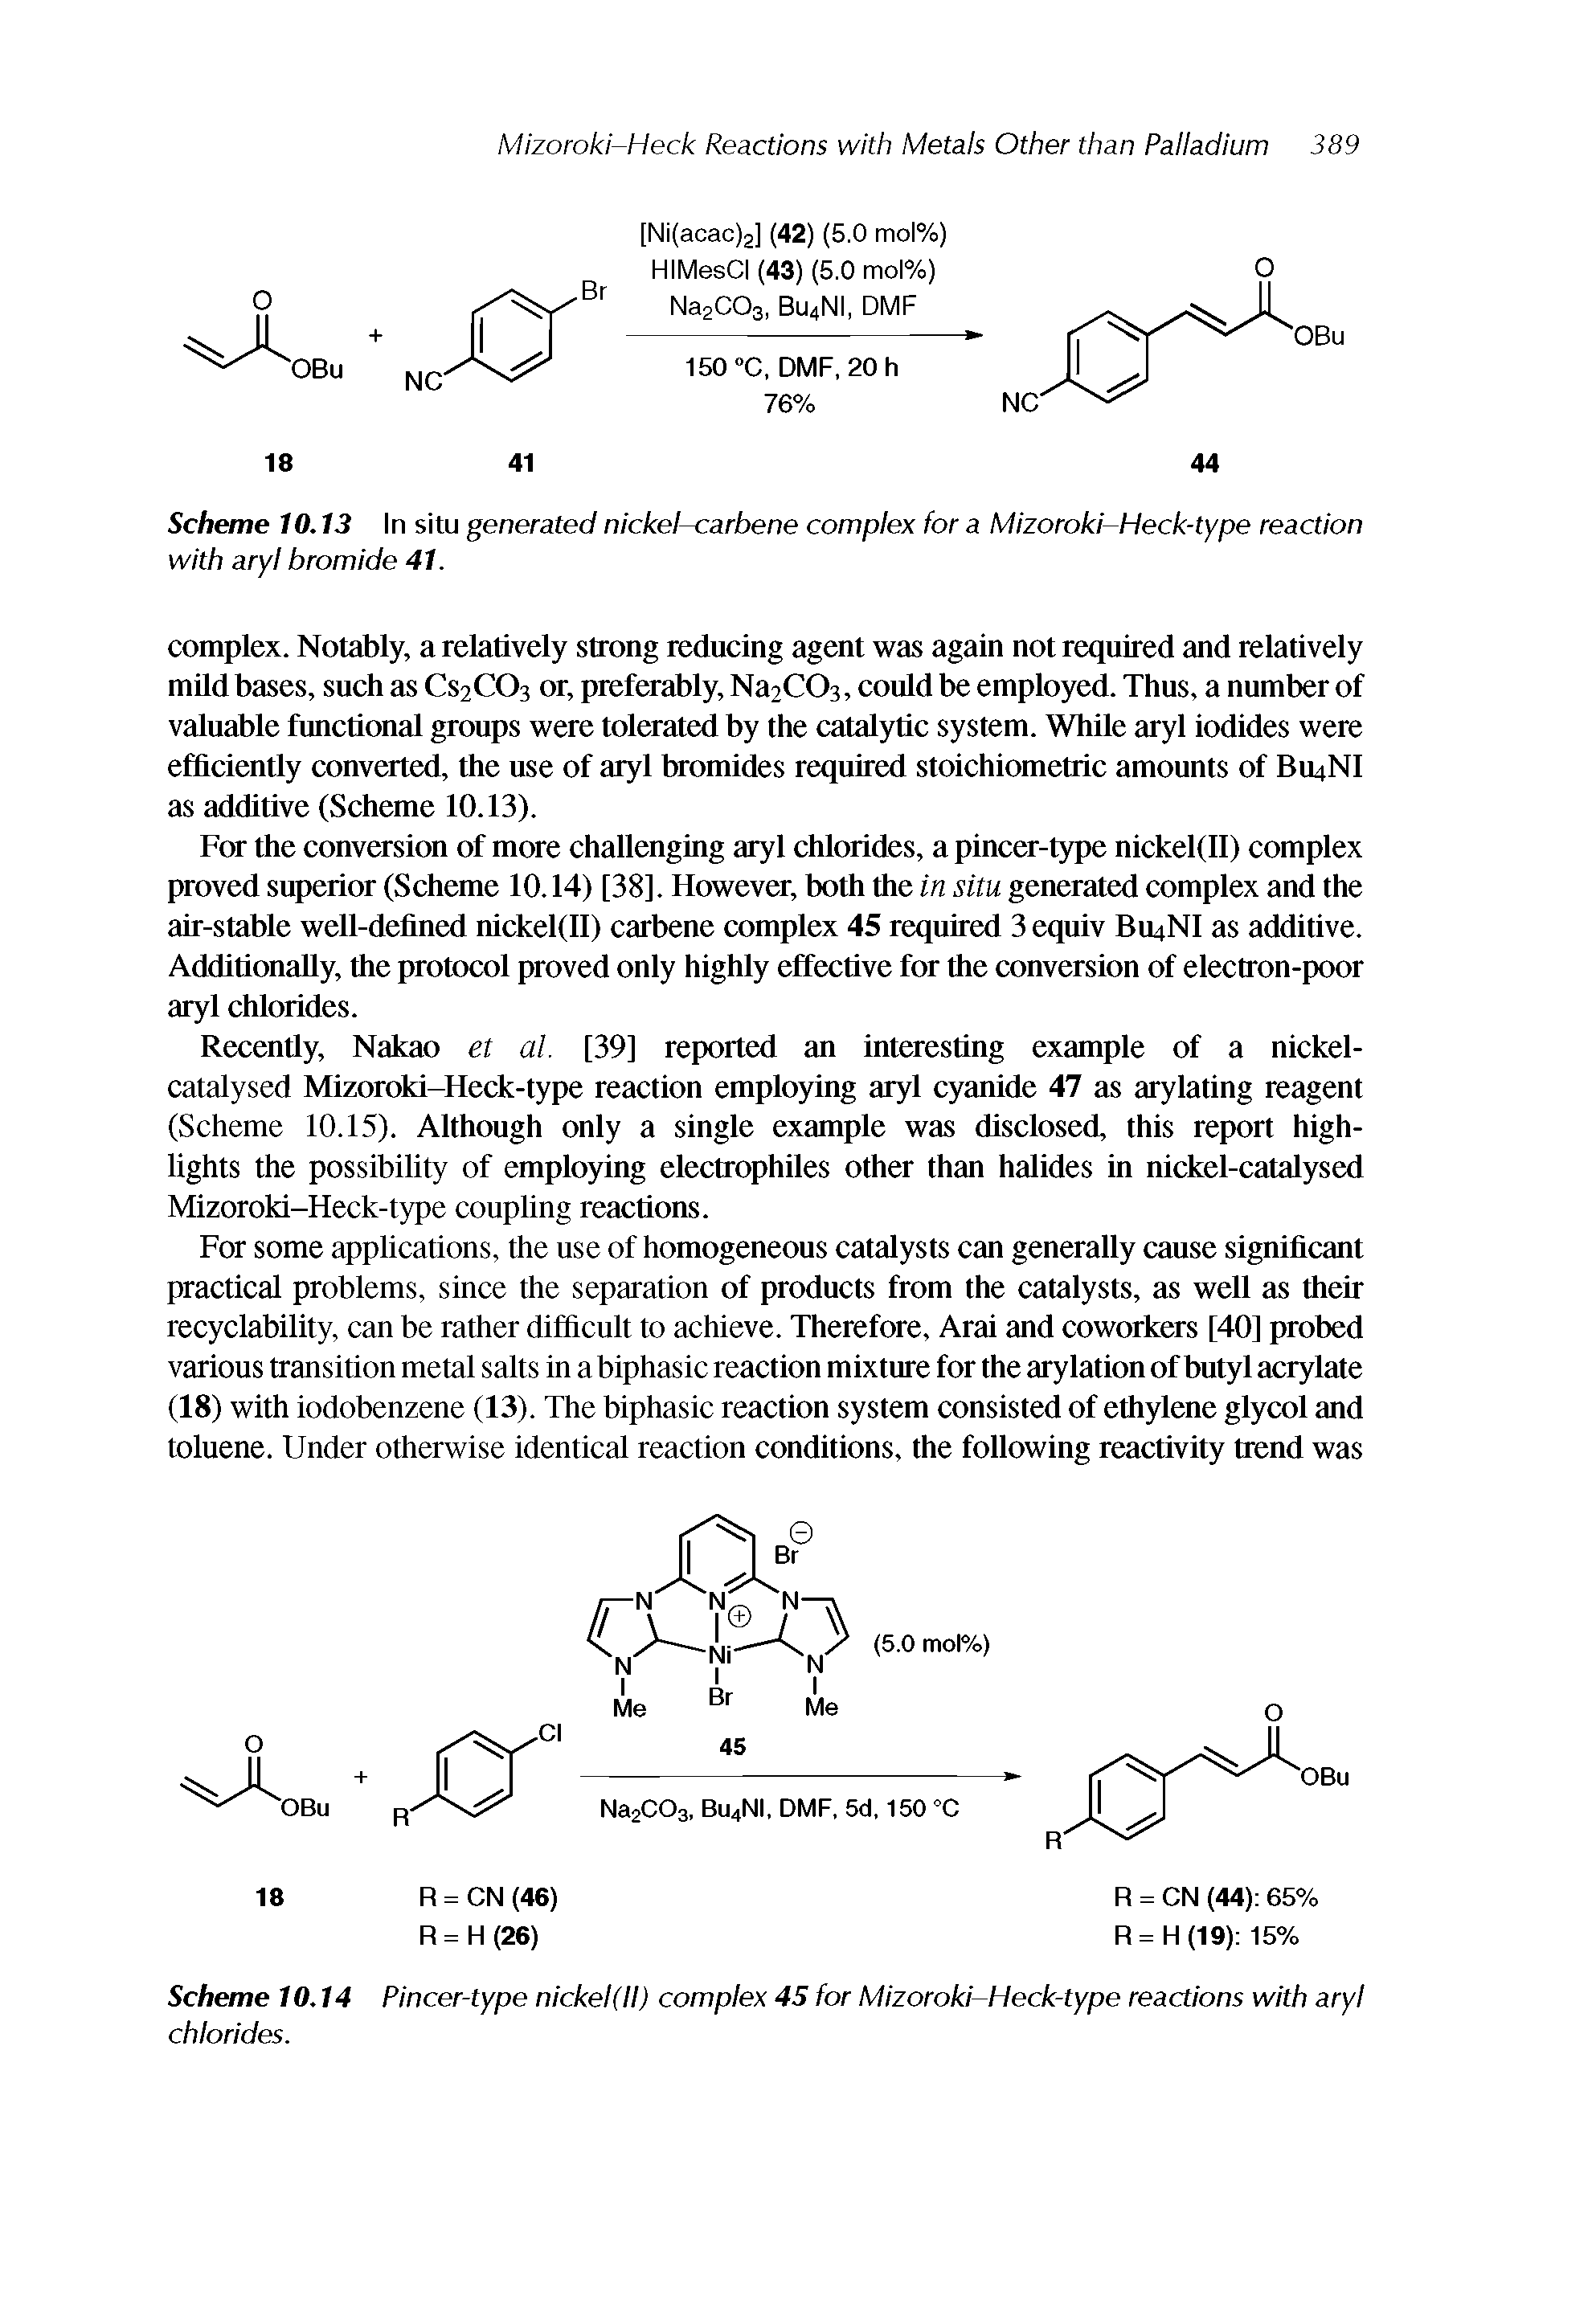 Scheme 10.14 Pincer-type nickel(ll) complex 45 for Mizoroki-Heck-type reactions with aryl chlorides.